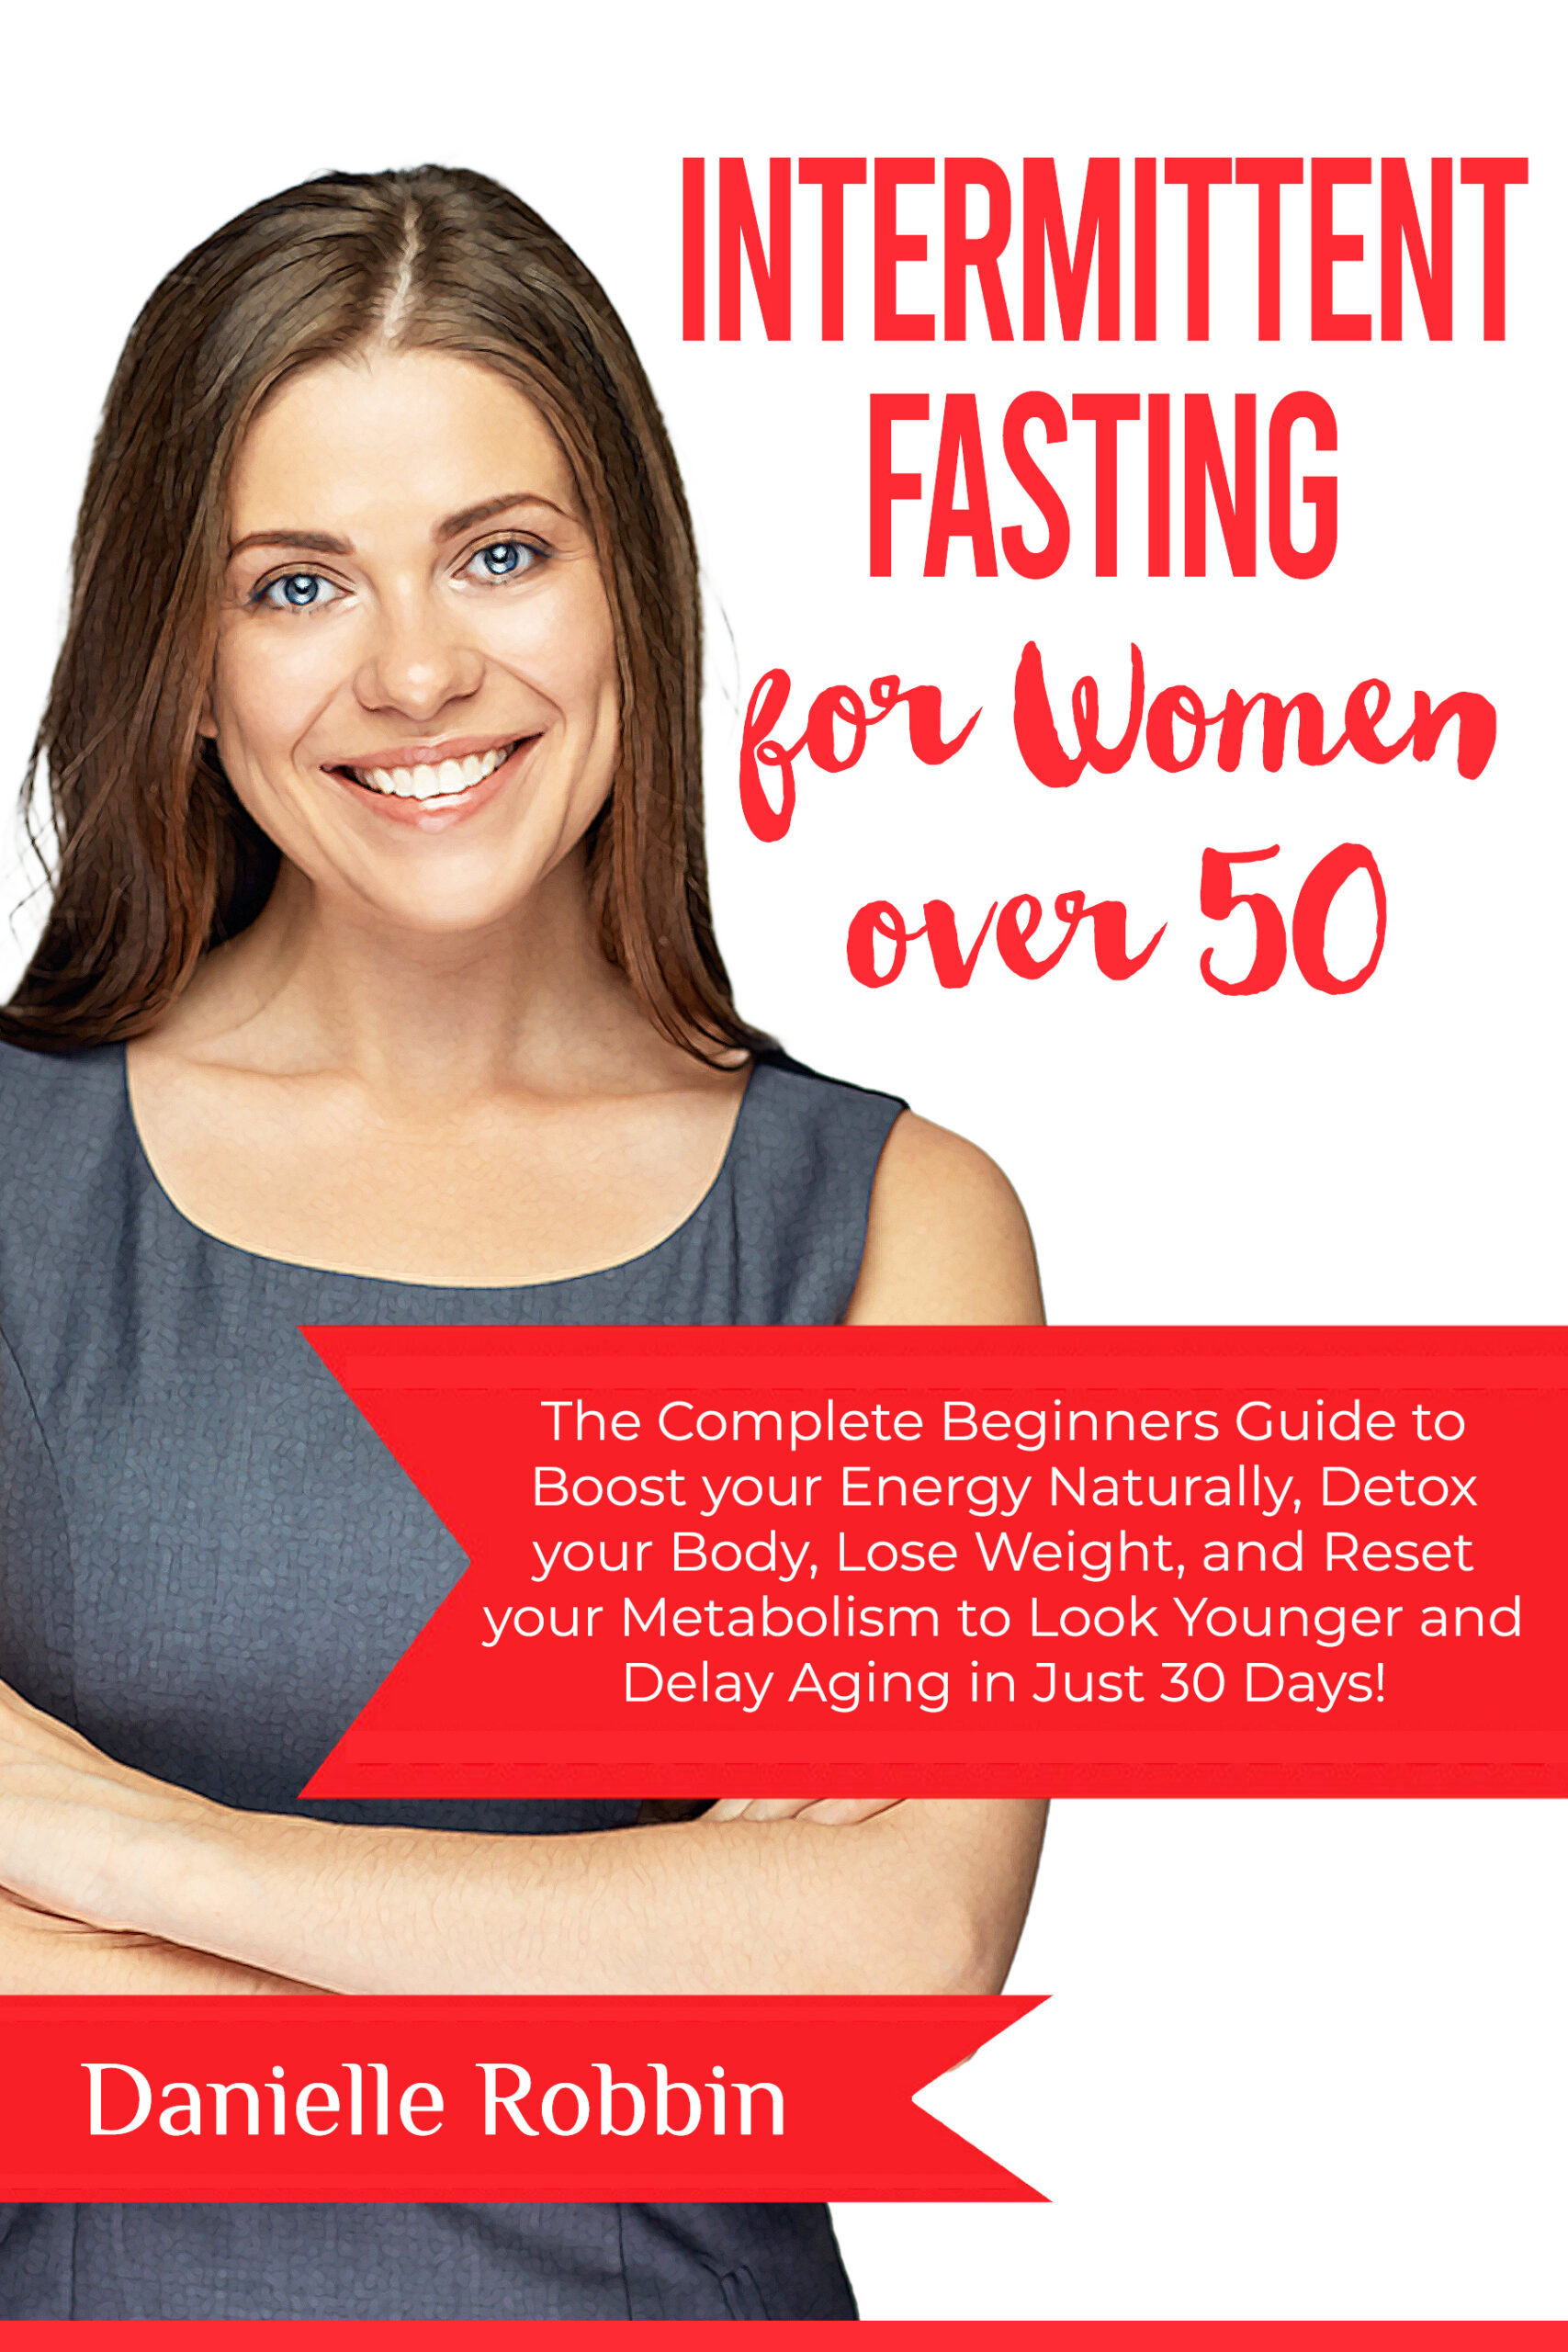 FREE: Intermittent Fasting for Women over 50: The Complete Beginners’ Guide to Boost Your Energy Naturally, Detox Your Body, Lose Weight, and Reset Your Metabolism … to look Younger and Delay Aging in Just 30 Days by Danielle Robbin